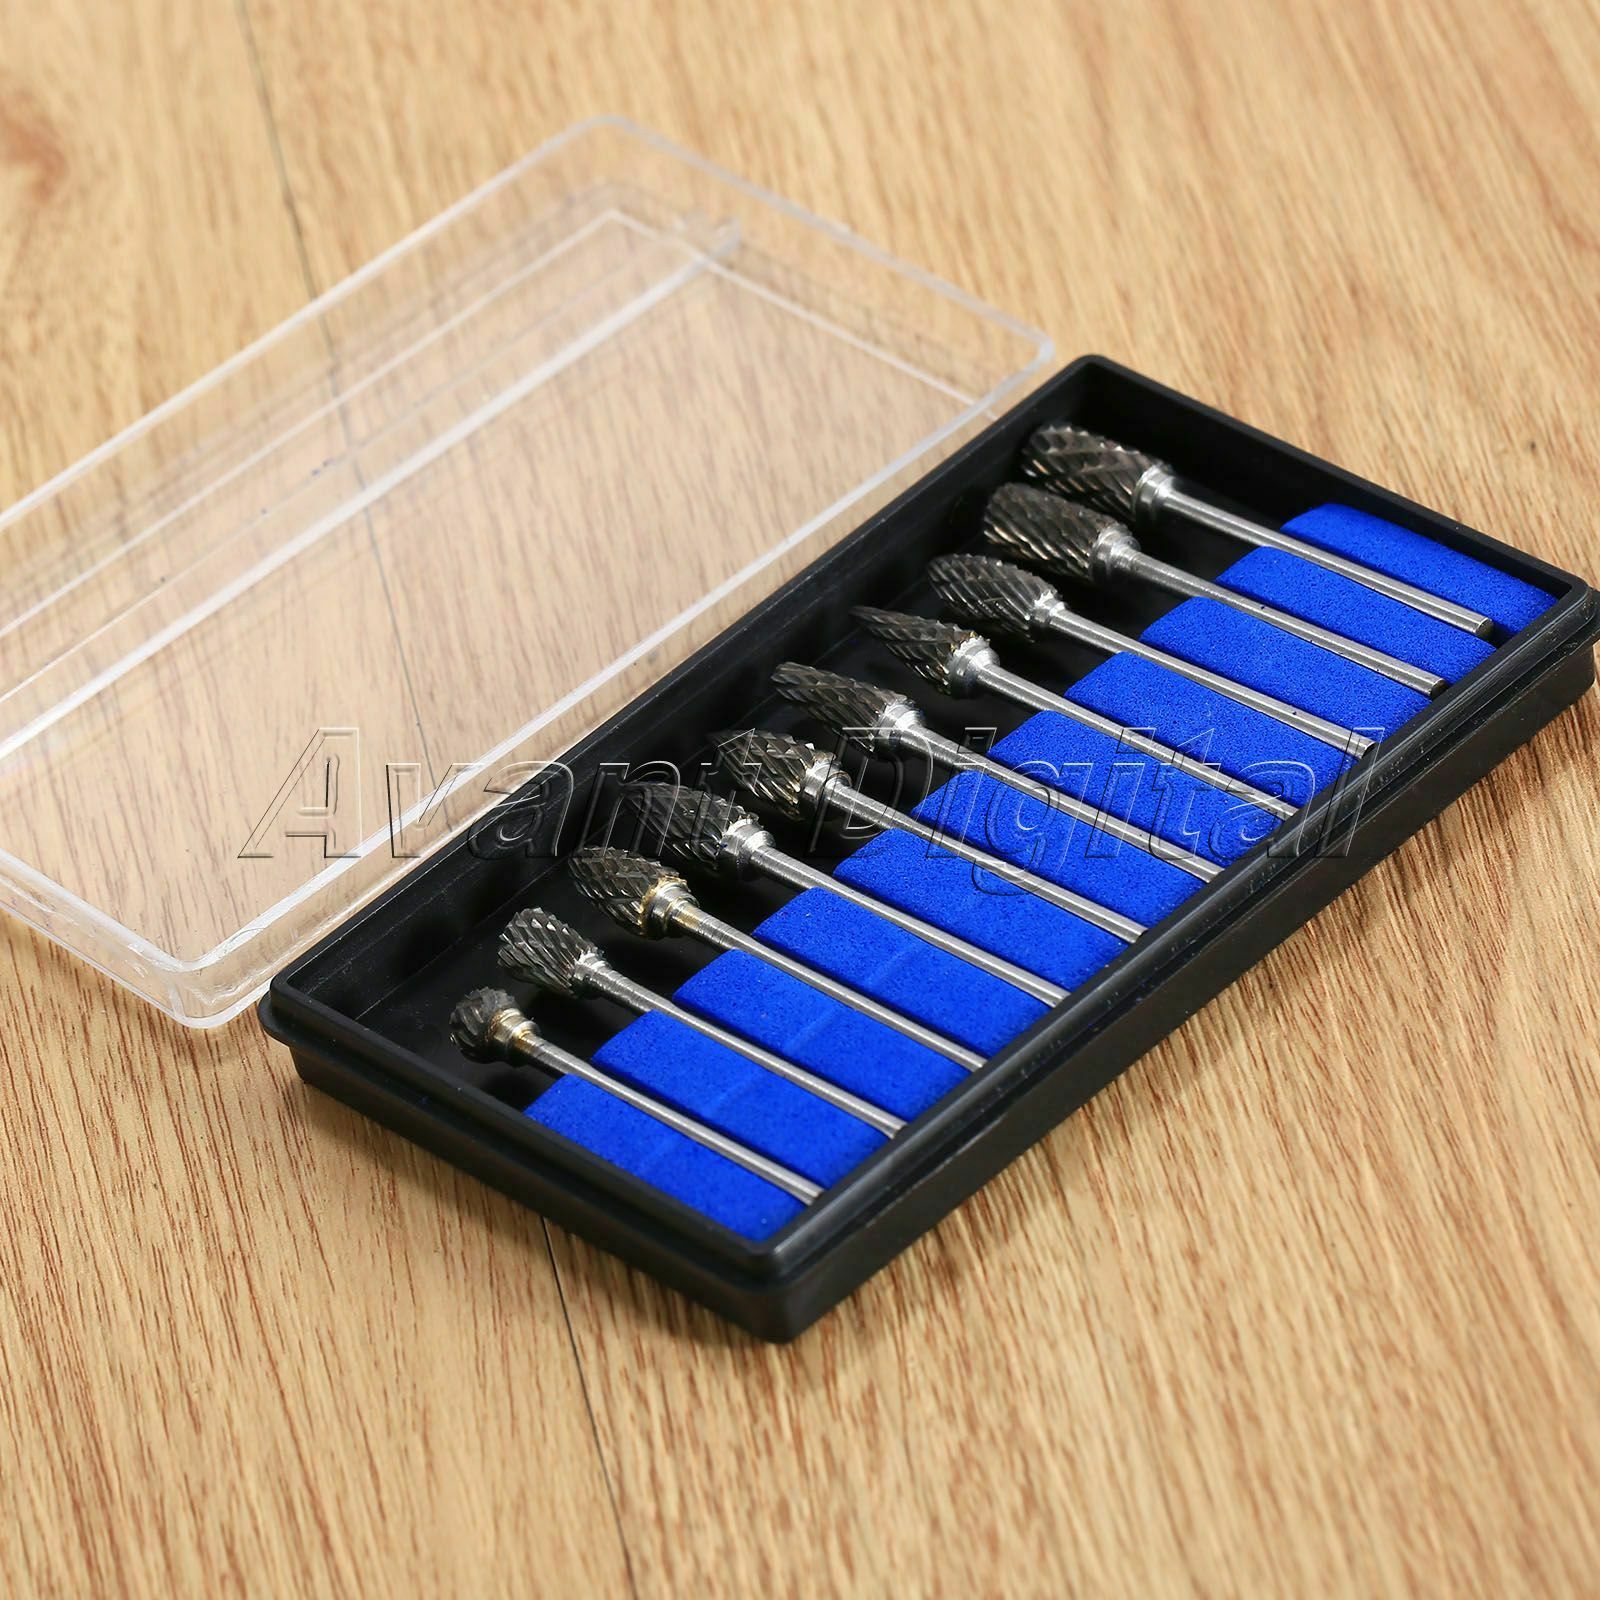 10X Polisher Carbide Burrs Kits Die Grinder Carving Bit for Power Rotary Tools